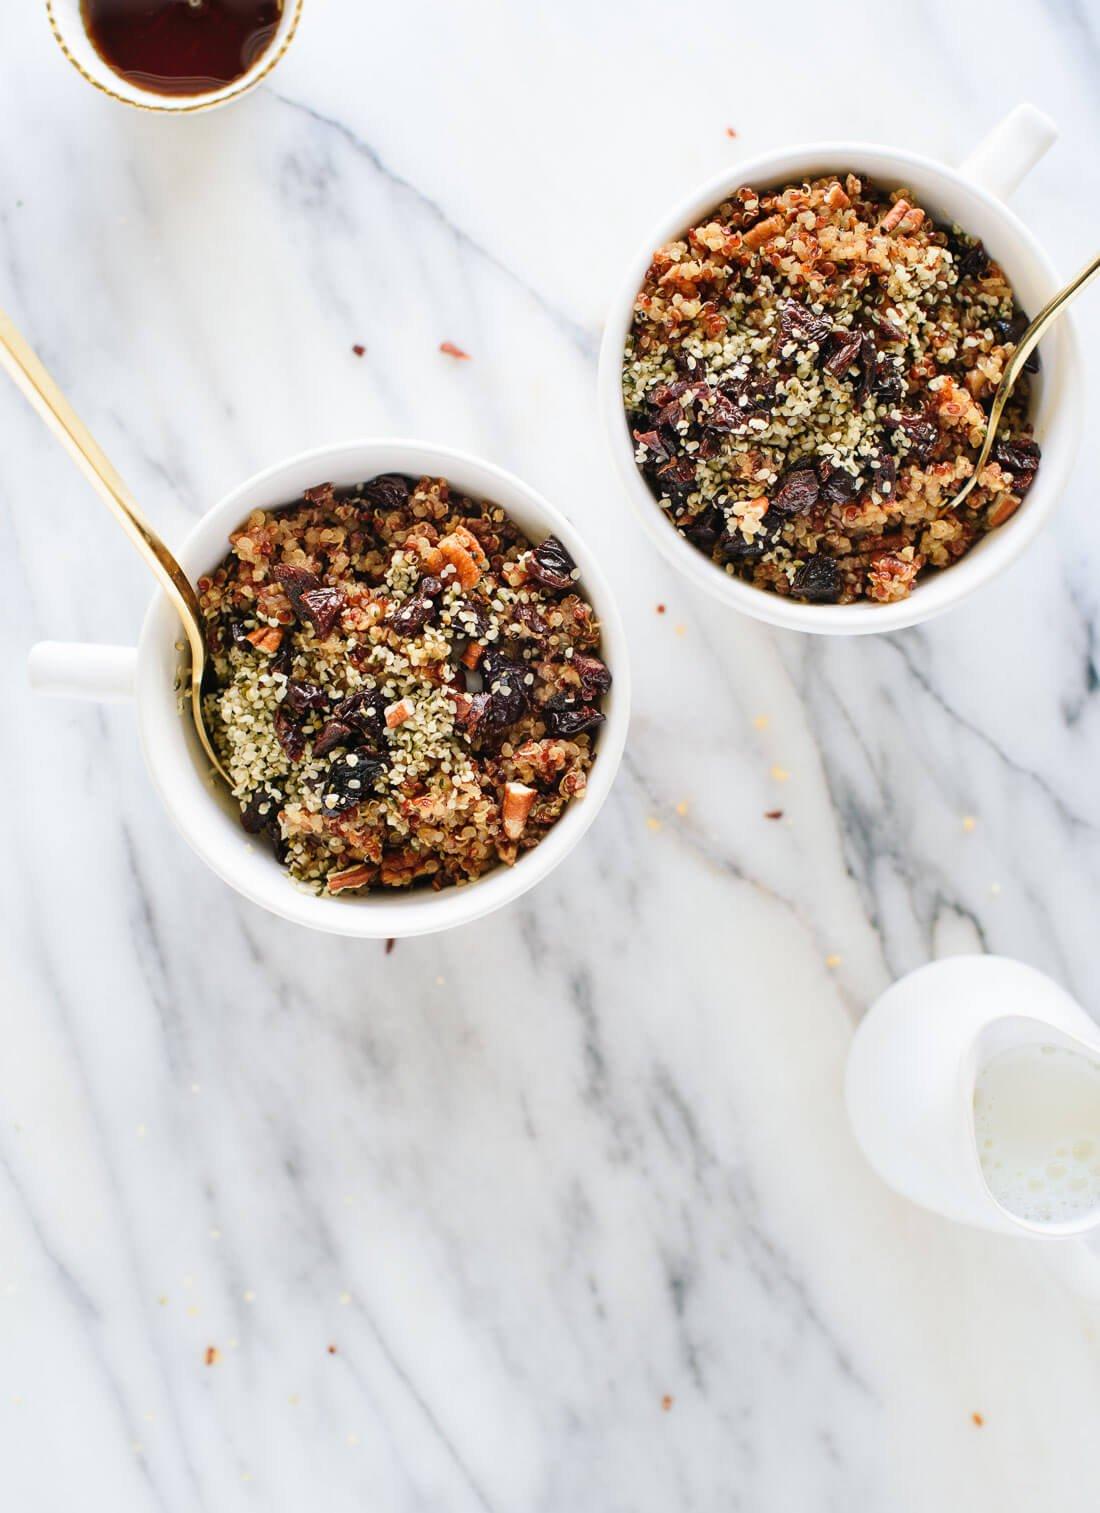 Epic breakfast quinoa featuring toasted pecans, coconut oil, cinnamon and dried cherries or cranberries - cookieandkate.com